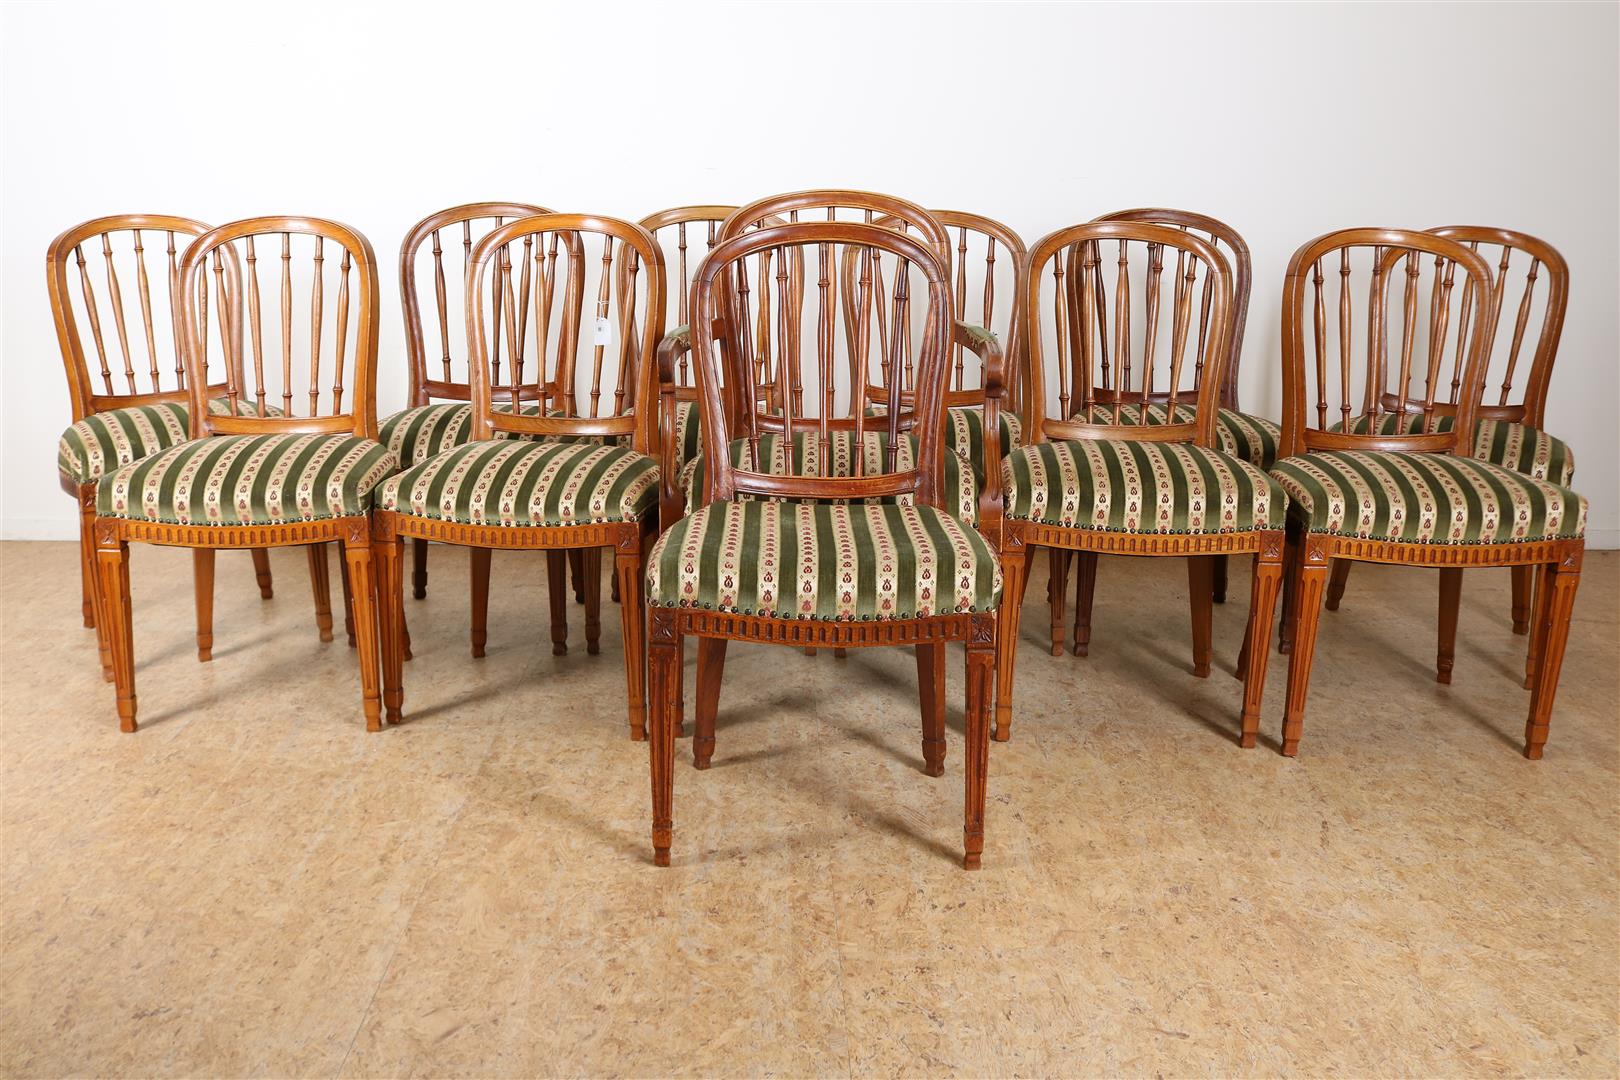 Series of 12 elm wood Louis XVI  chairs with horseshoe-shaped bars backrest and striped velvet